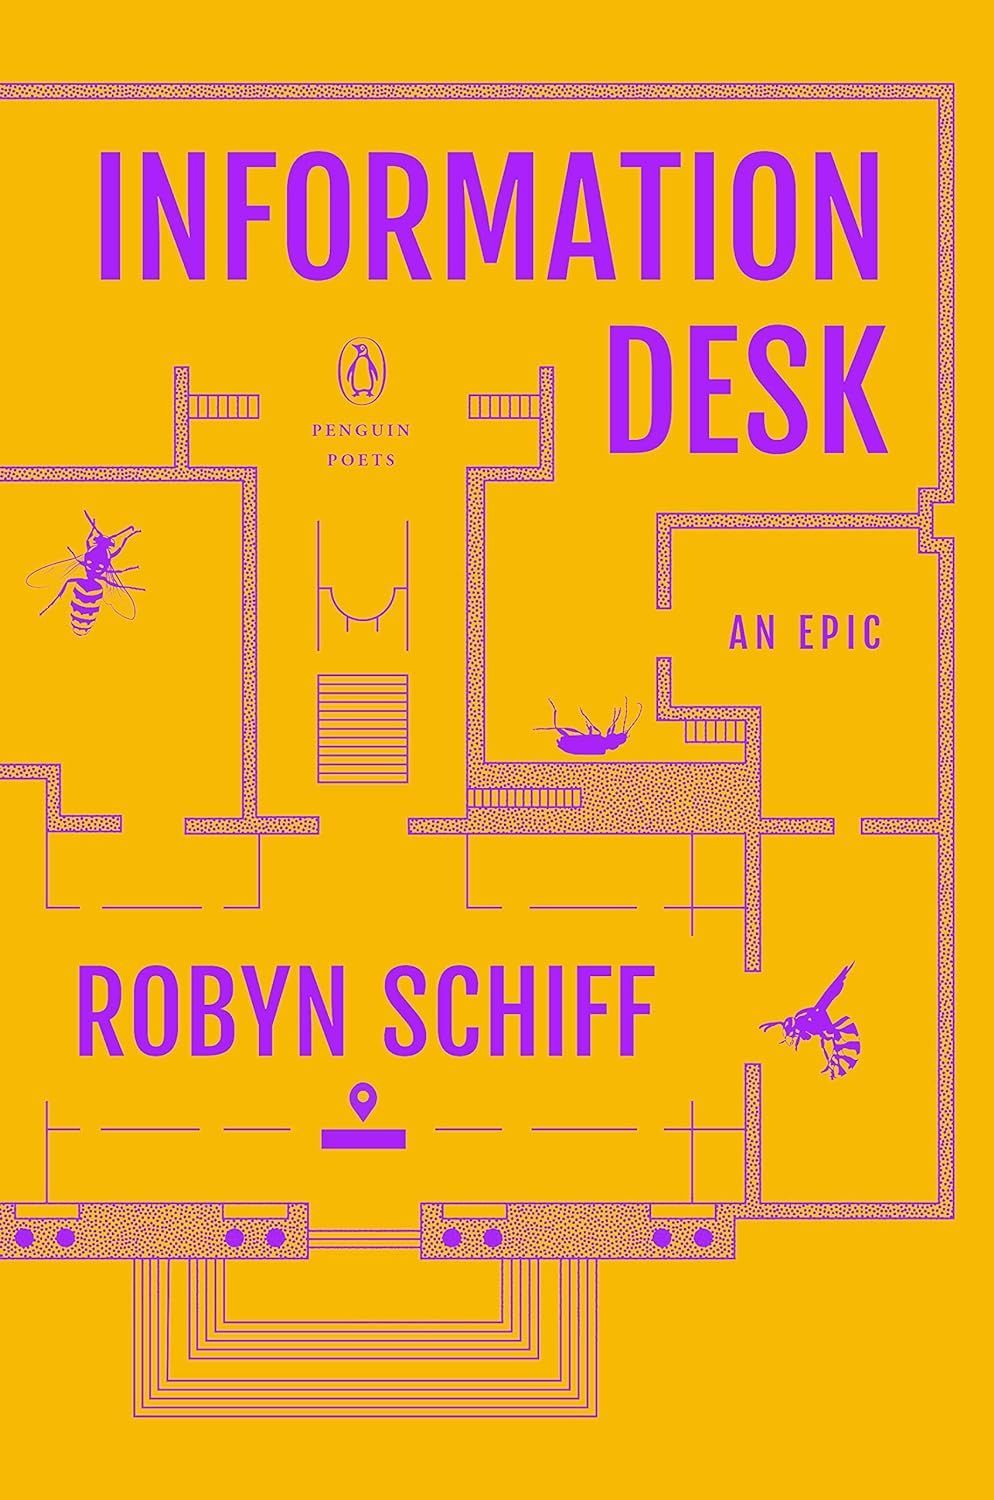 Aquiver with Significance: On Robyn Schiff’s “Information Desk”